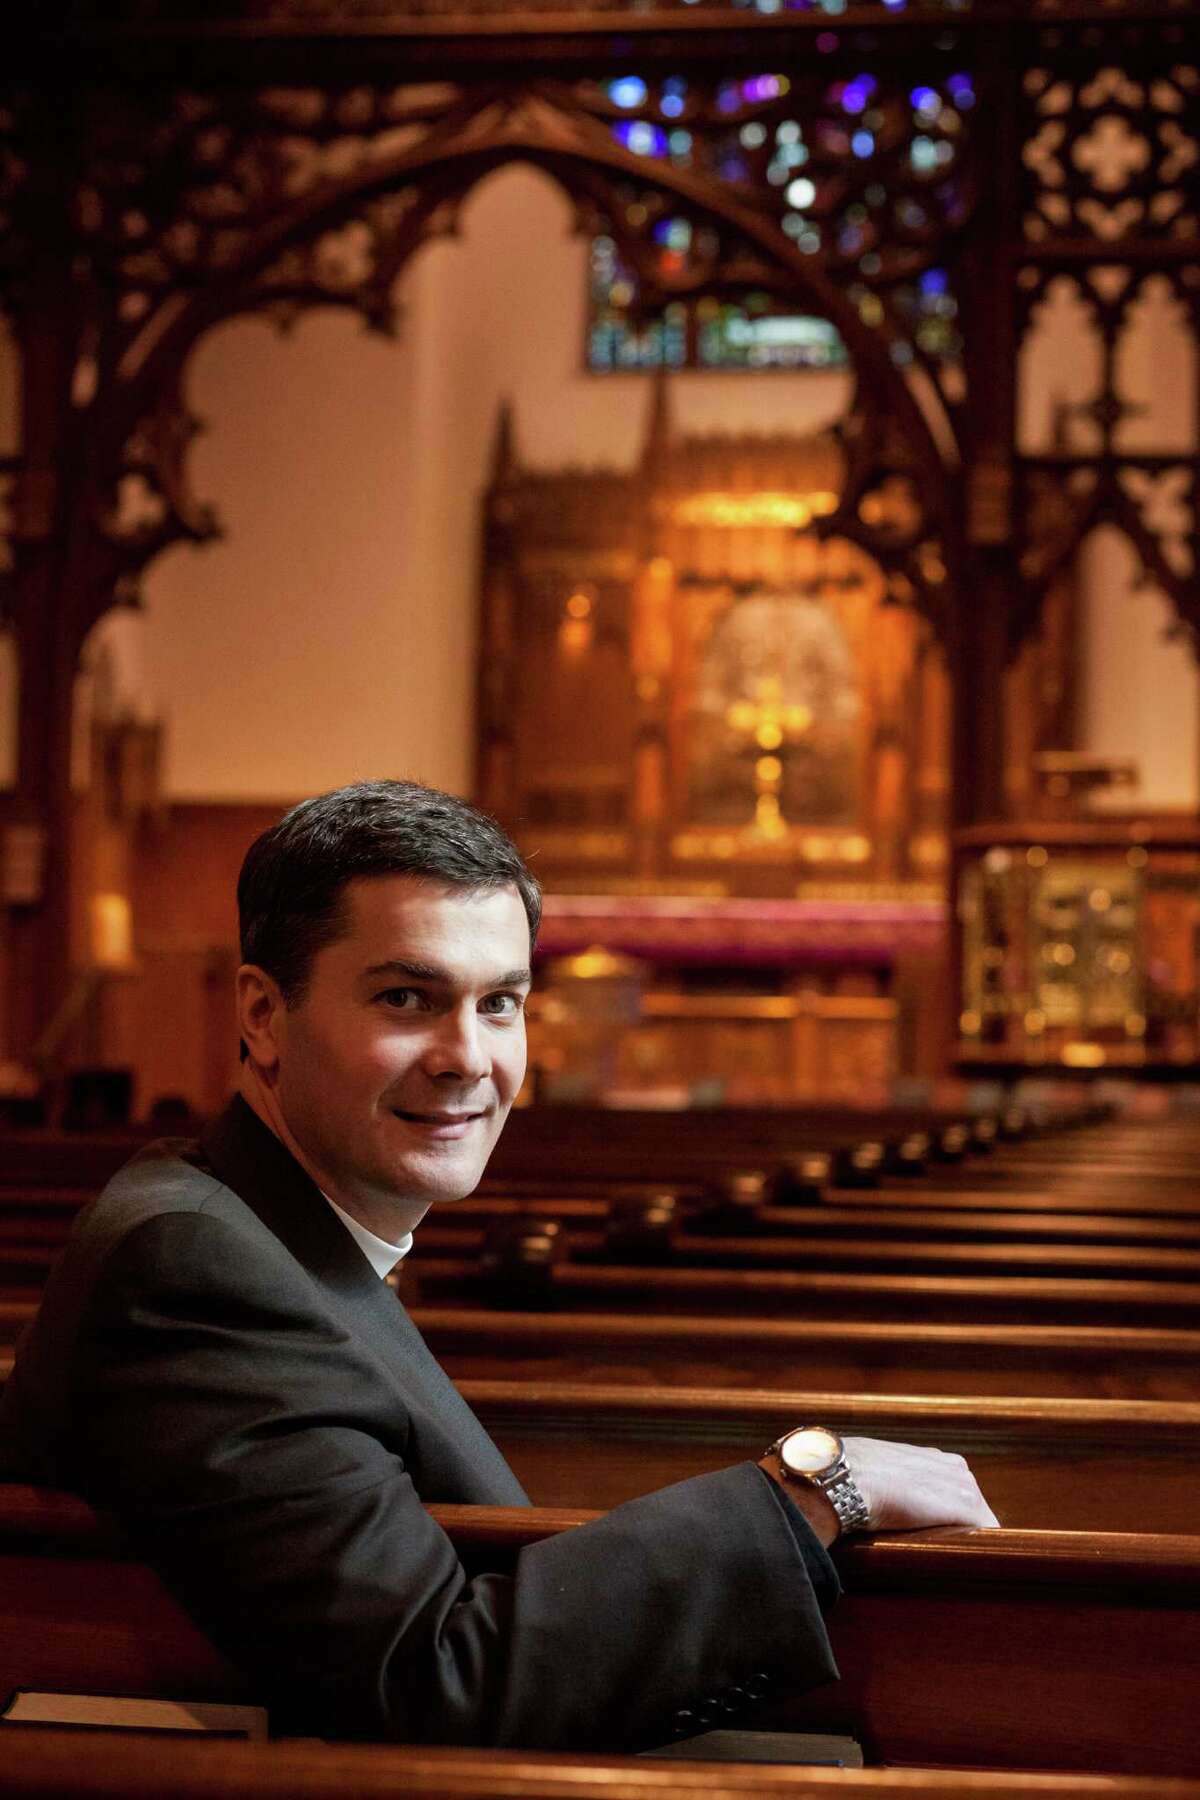 Dean Barkley Thompson today leads Christ Church Cathedral, which was chartered in 1839 in a rough-and-tumble Houston.